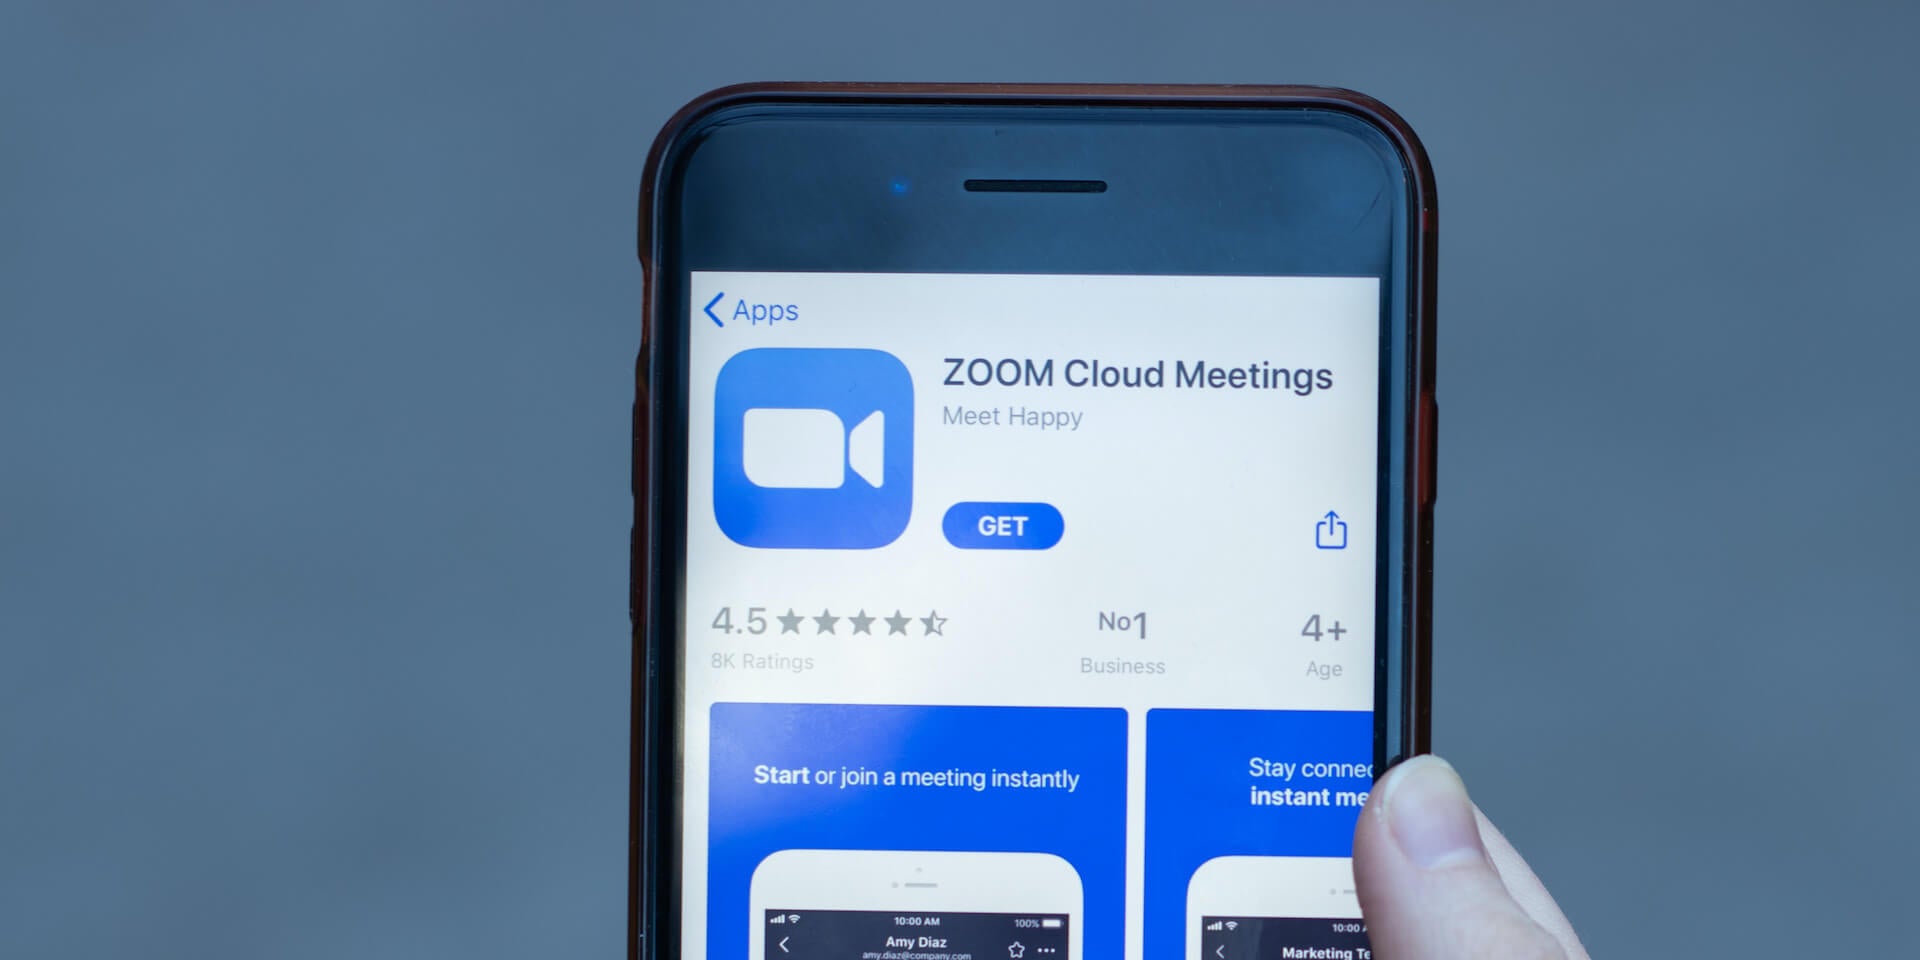 How To Refresh Your Zoom Application On Ipad, iPhone, And Android Telephones And Tablets?